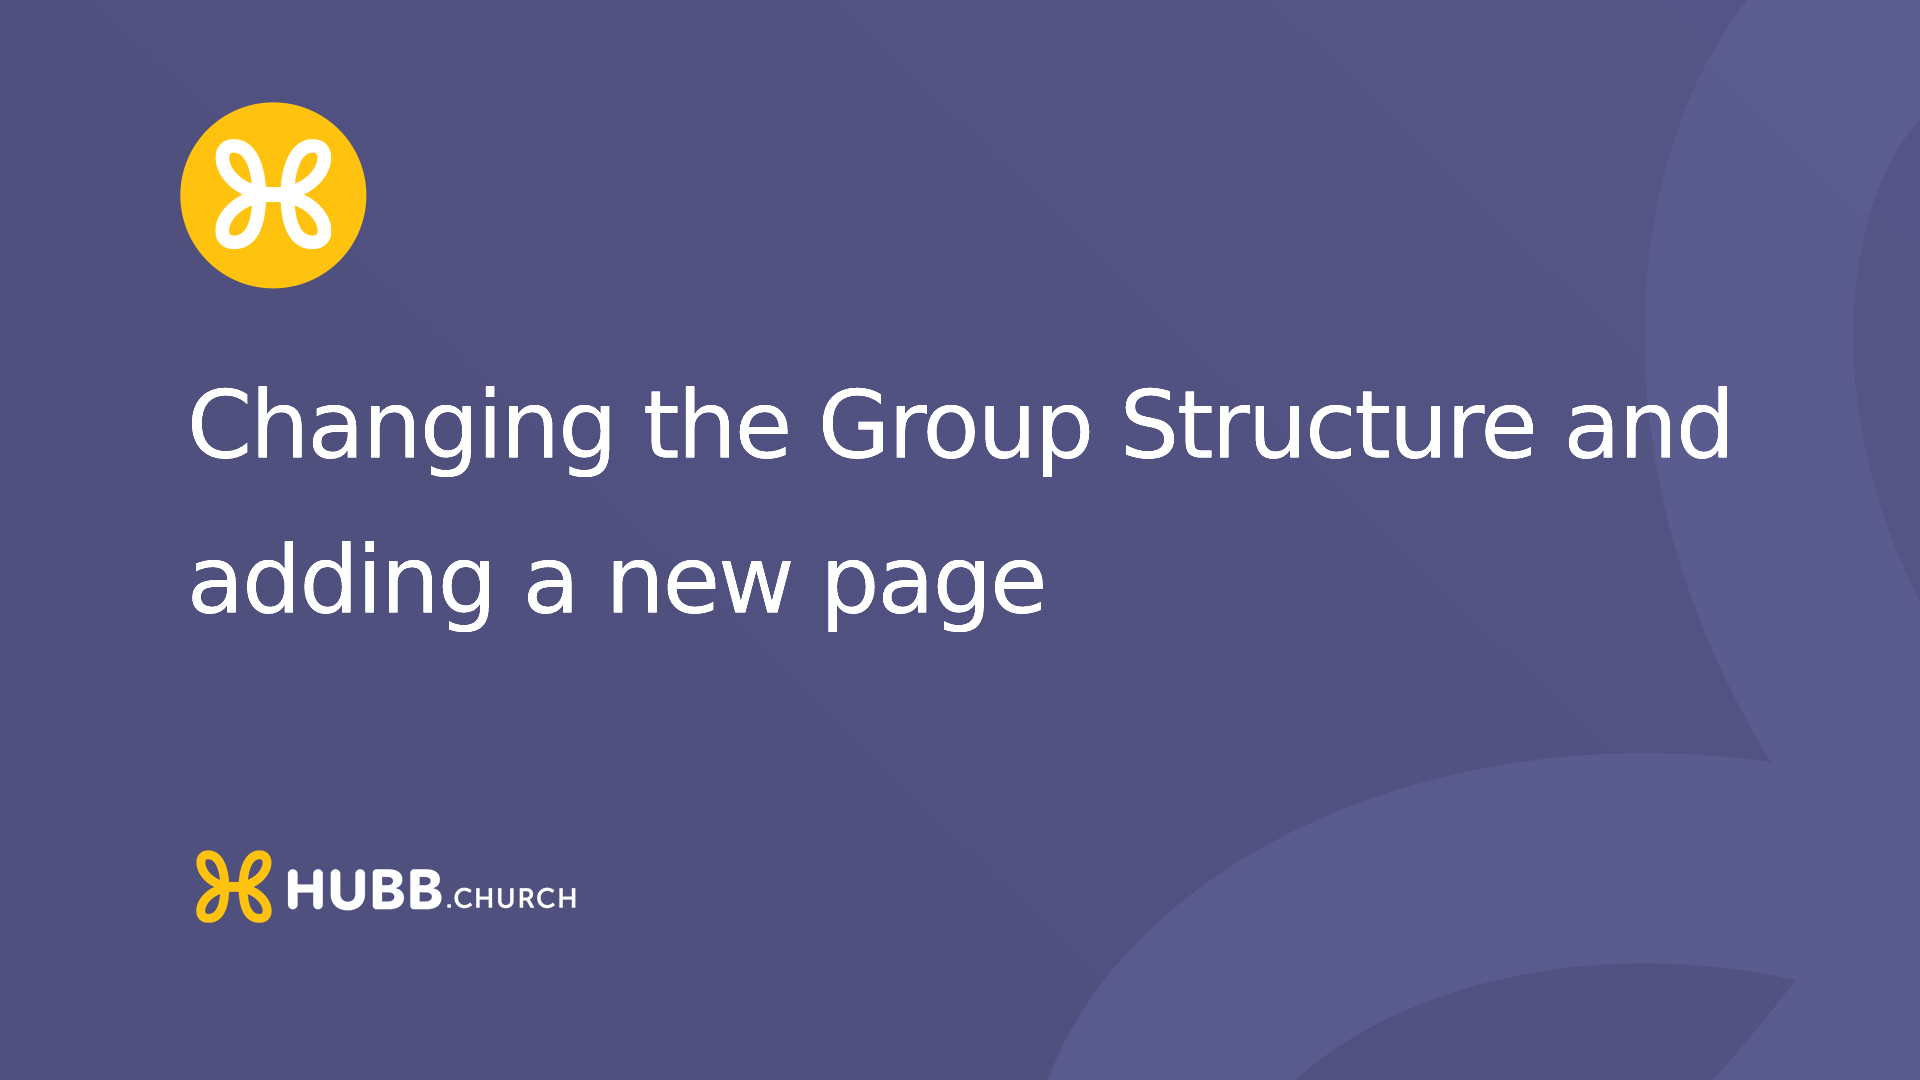 Changing the group structure and adding a new page